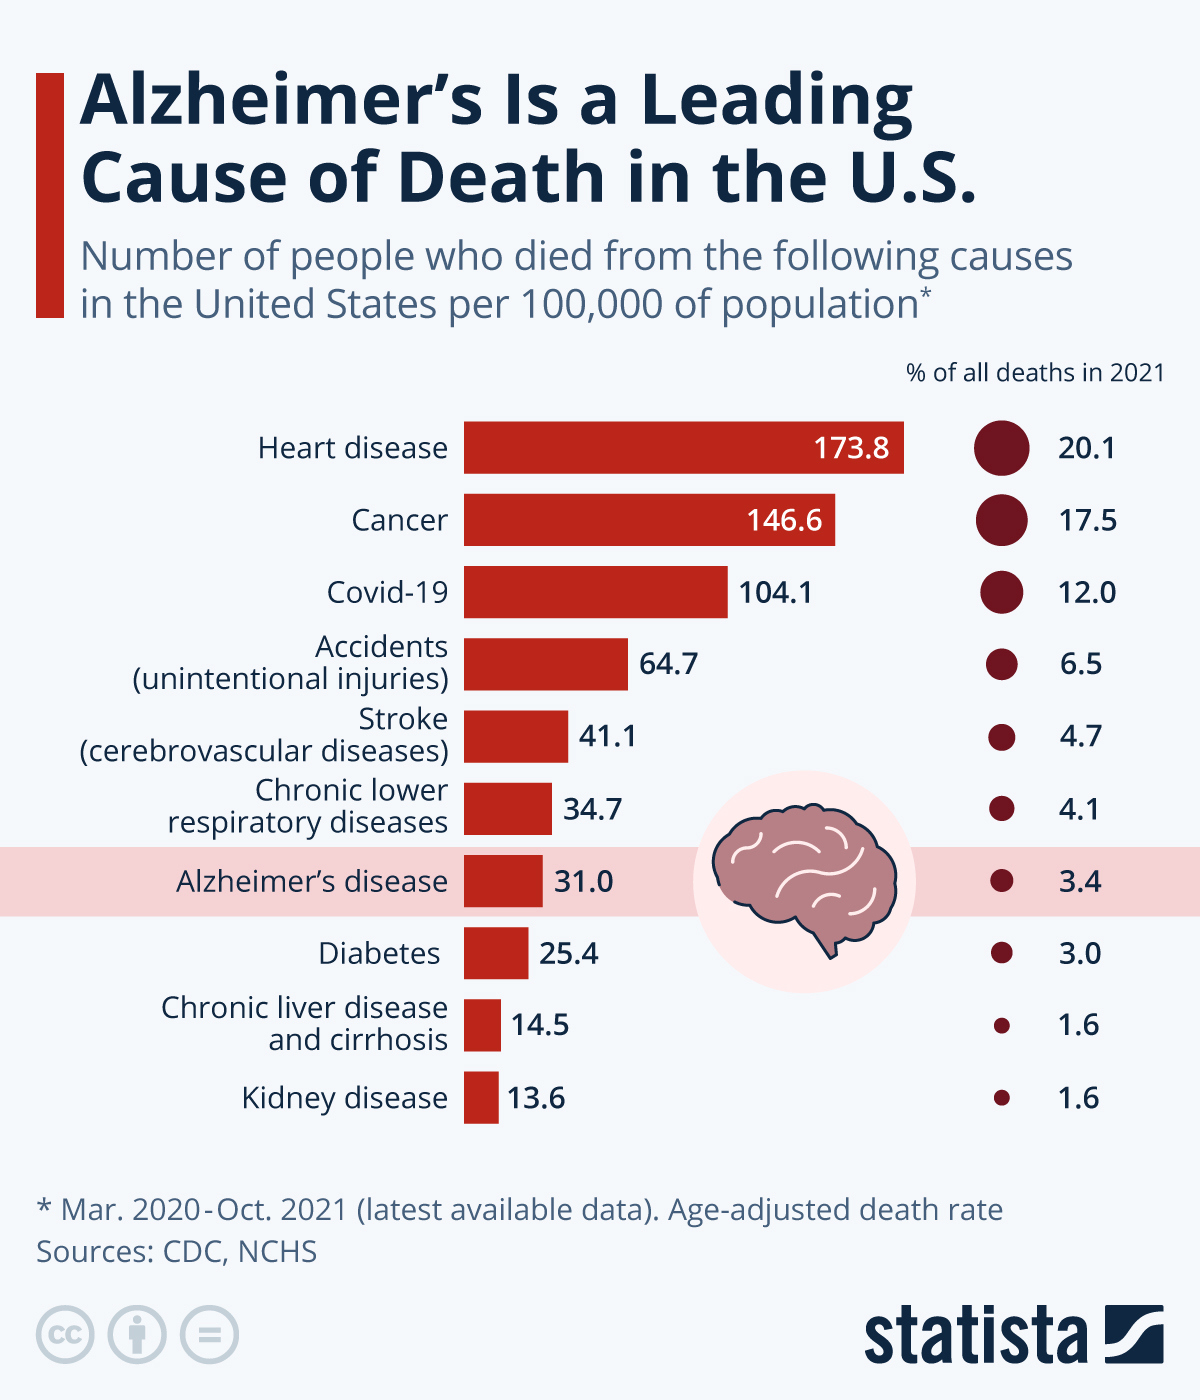 Alzheimer's Is a Leading Cause of Death in the U.S.